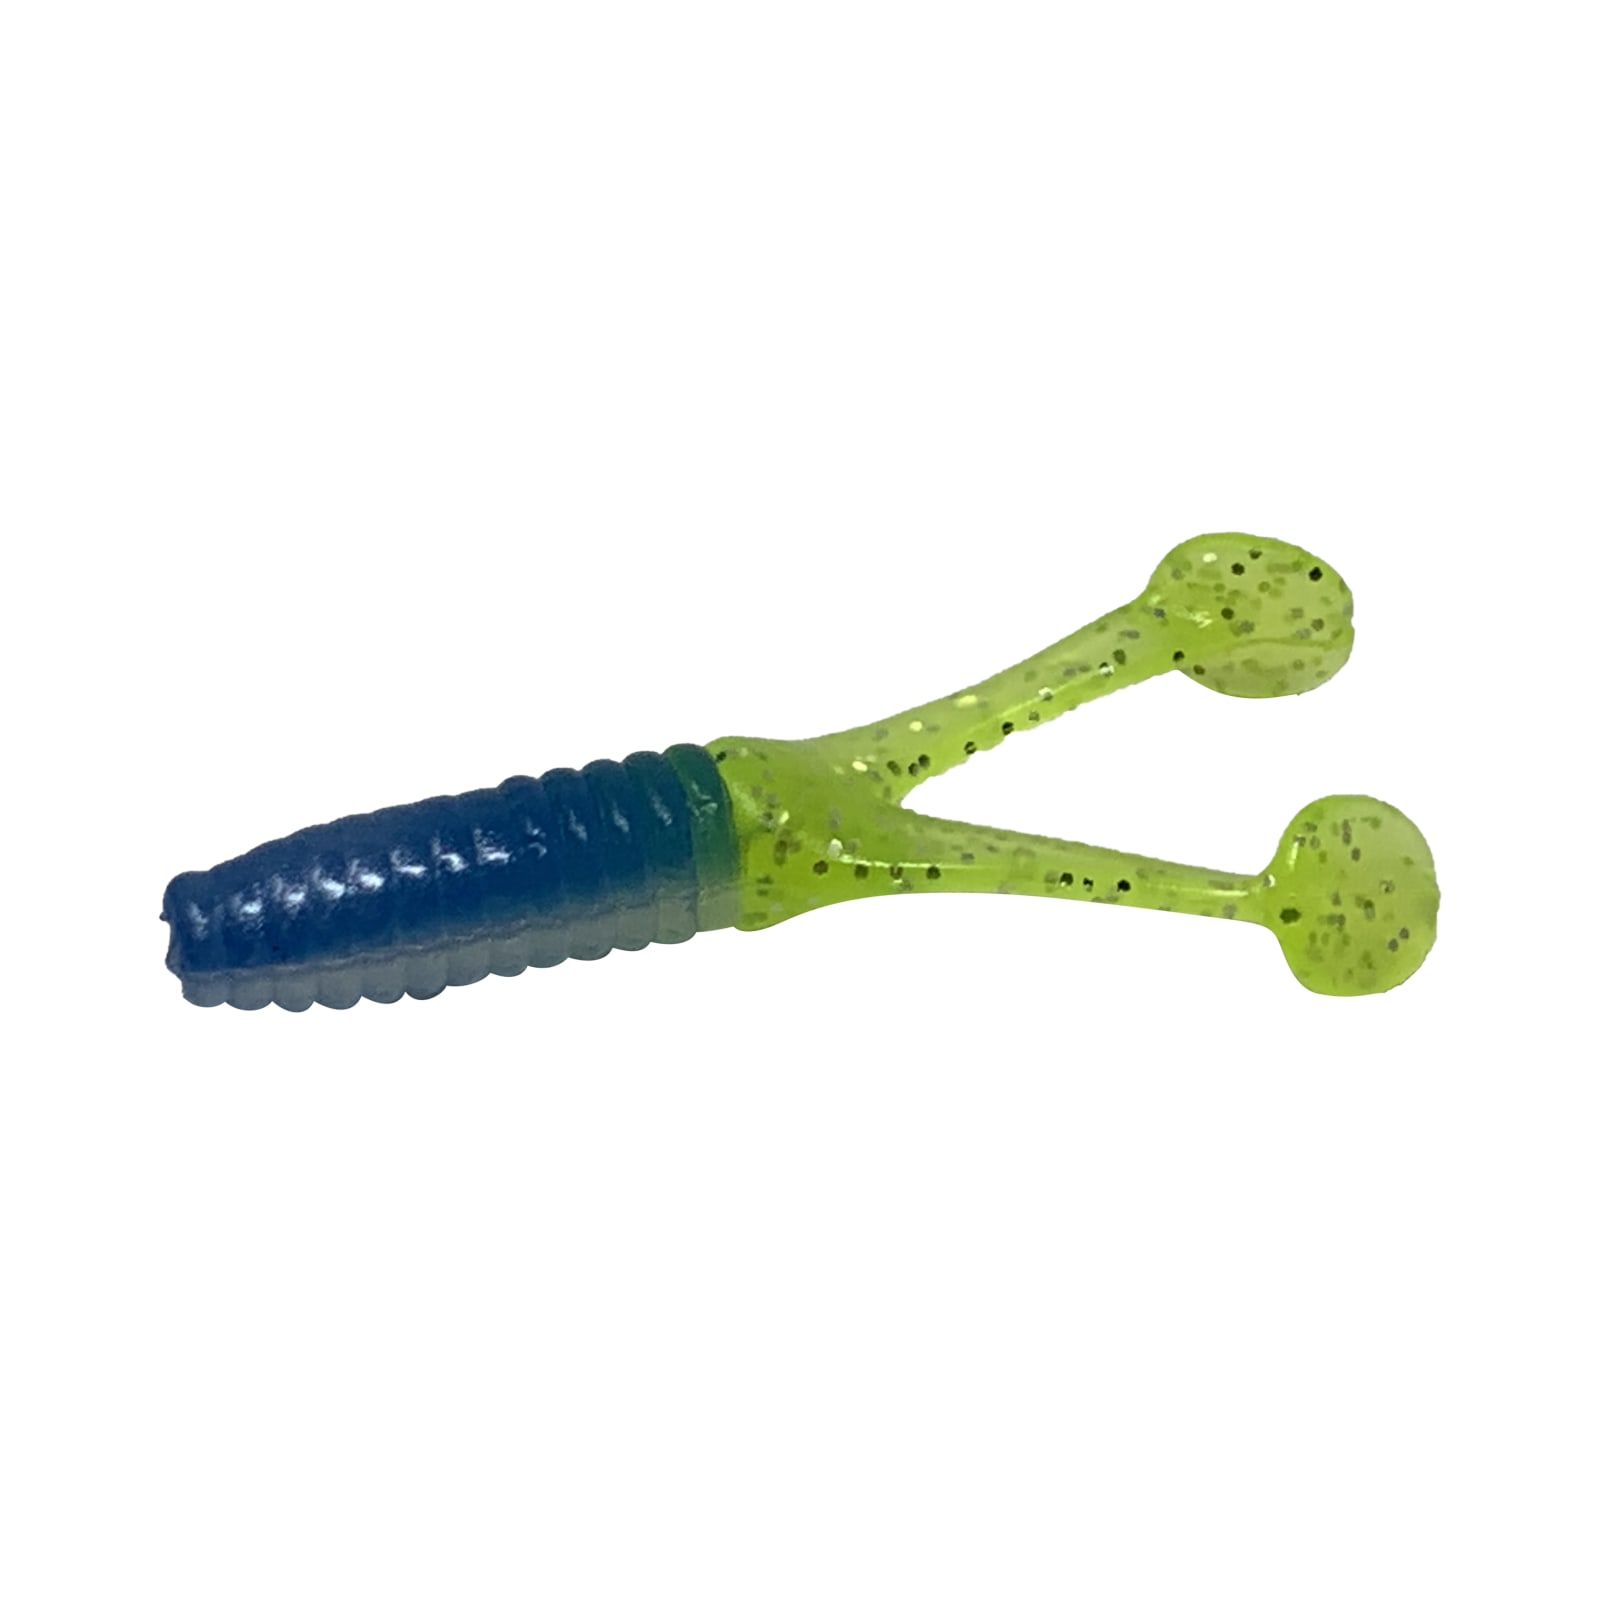 Blue Silver Chartreuse Tail Triple Threat Crappie Scrub by Kalin's